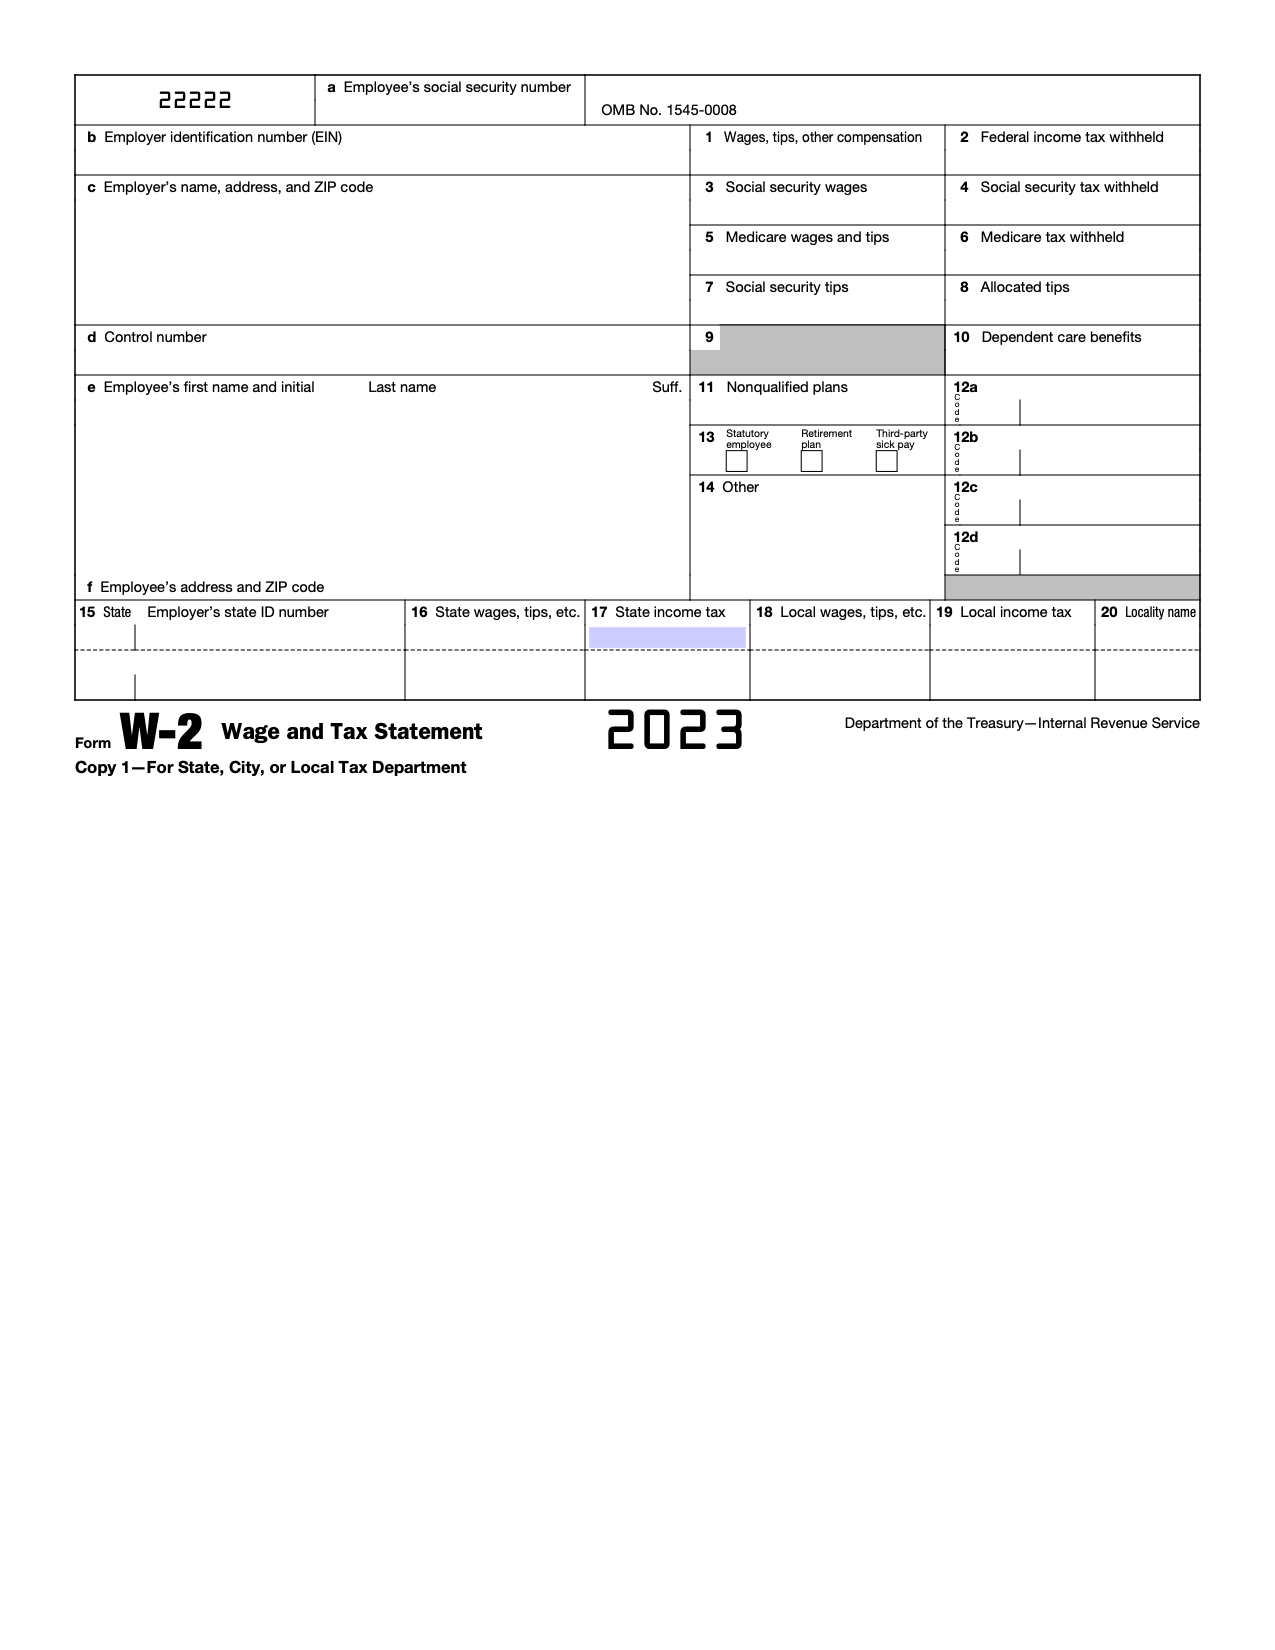 Free Irs Form W-2 | Wage And Tax Statement - Pdf – Eforms pertaining to Printable W2 Forms For Employees